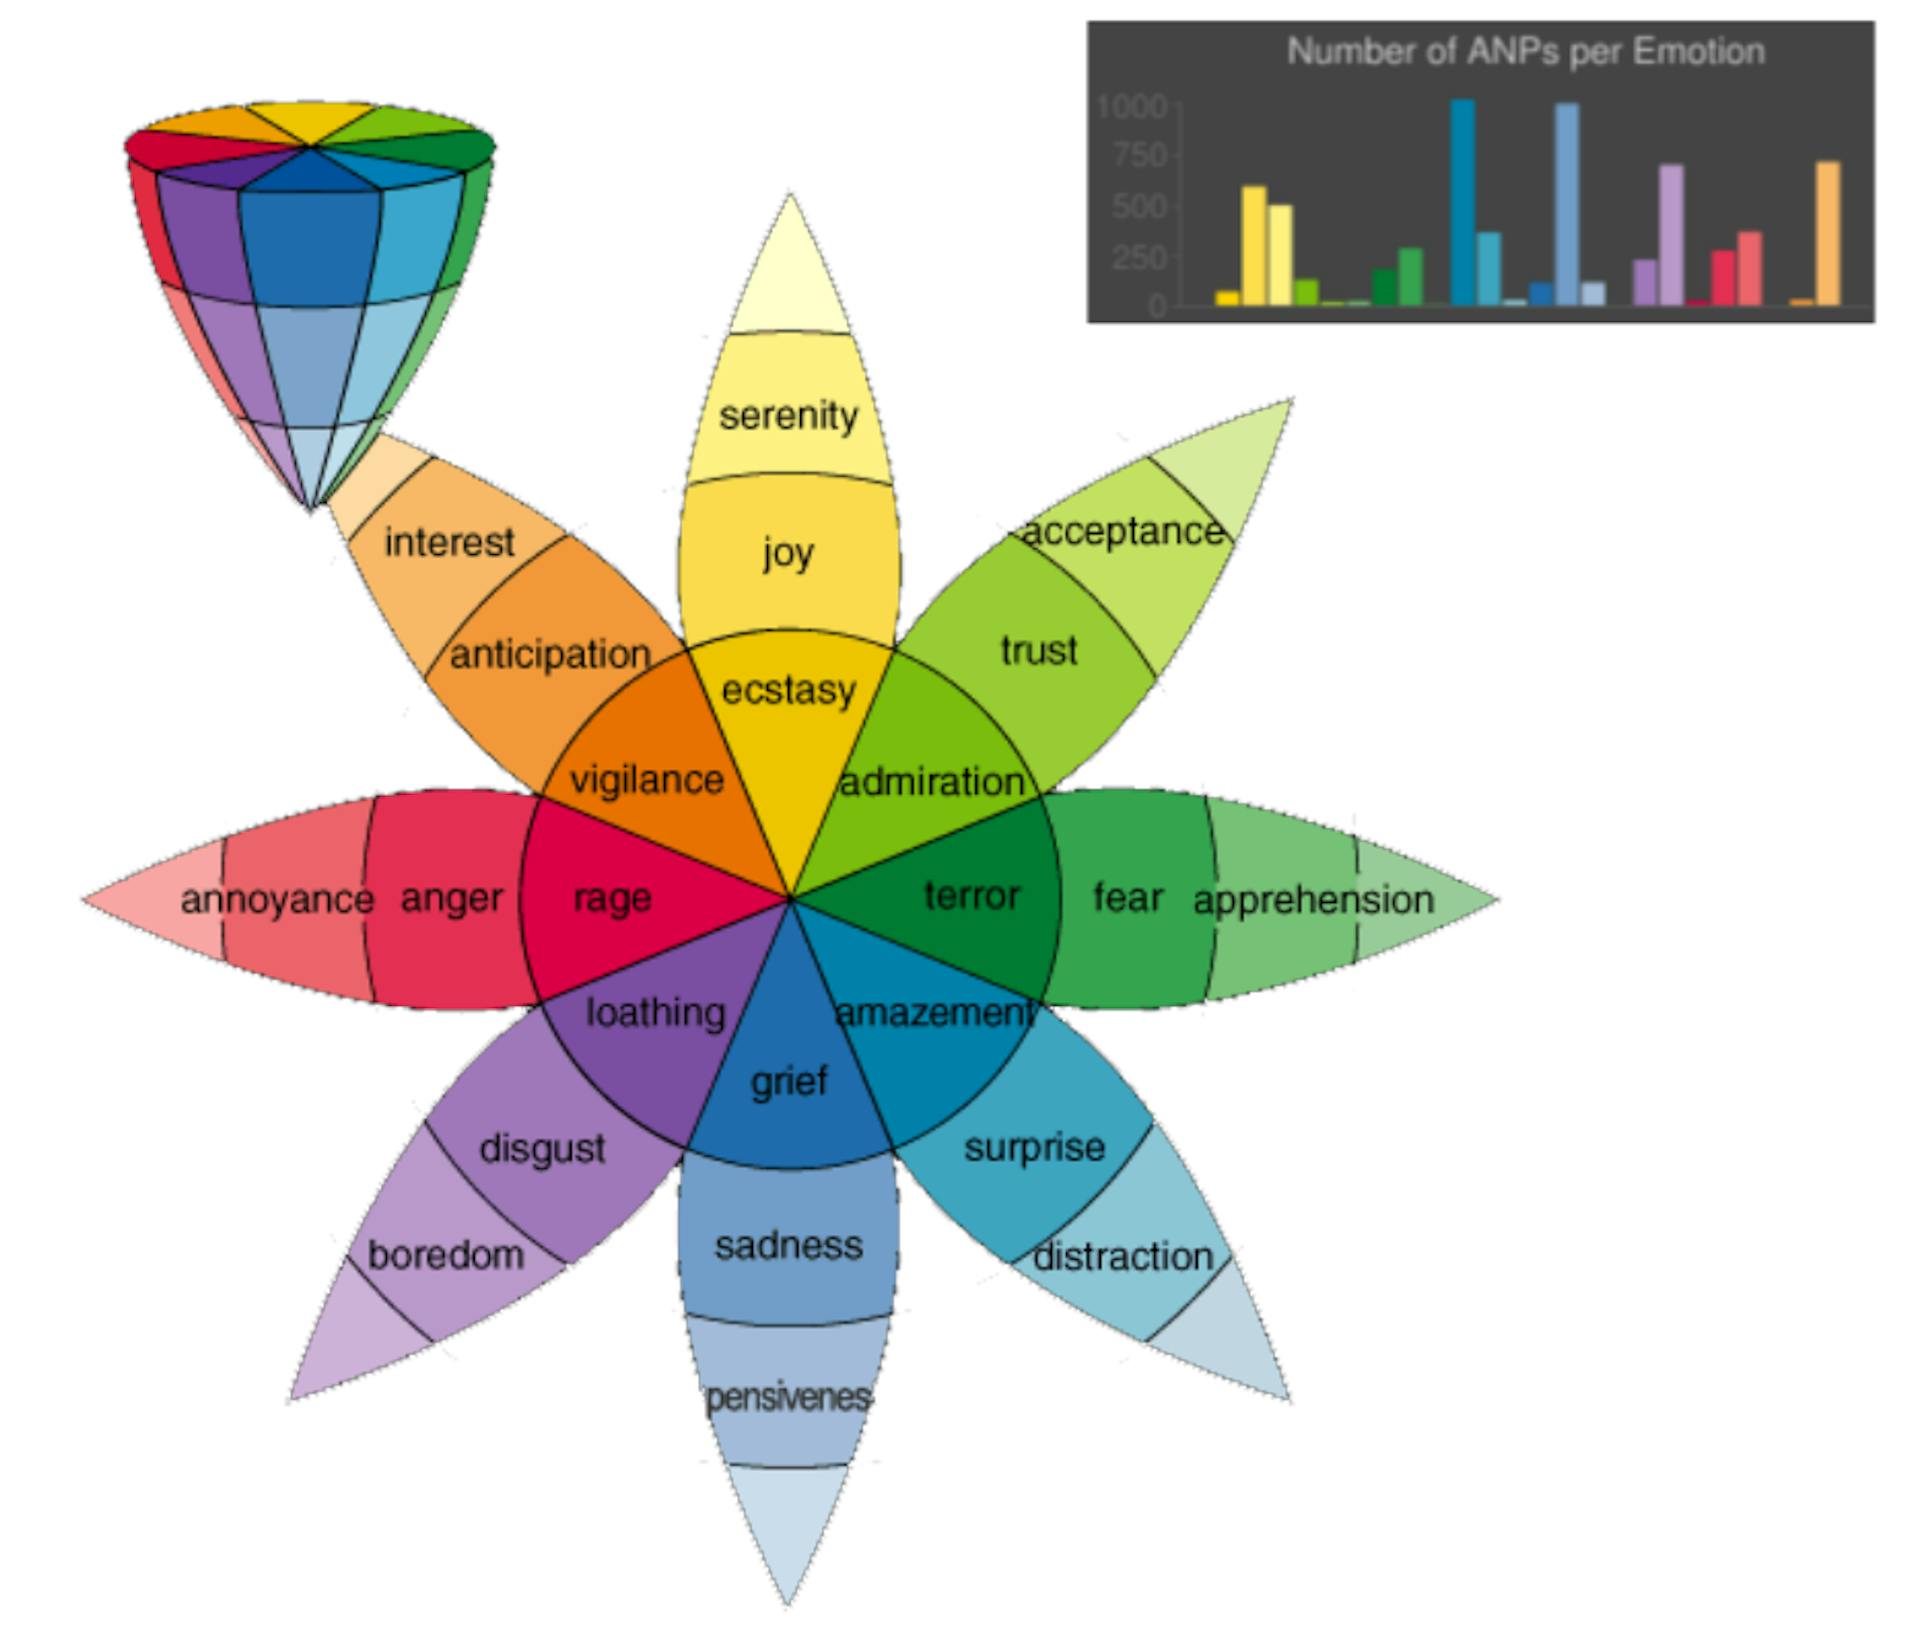 Figure 4.8: Plutchik’s wheel of emotions and the number of ANPs per emotion in VSO.